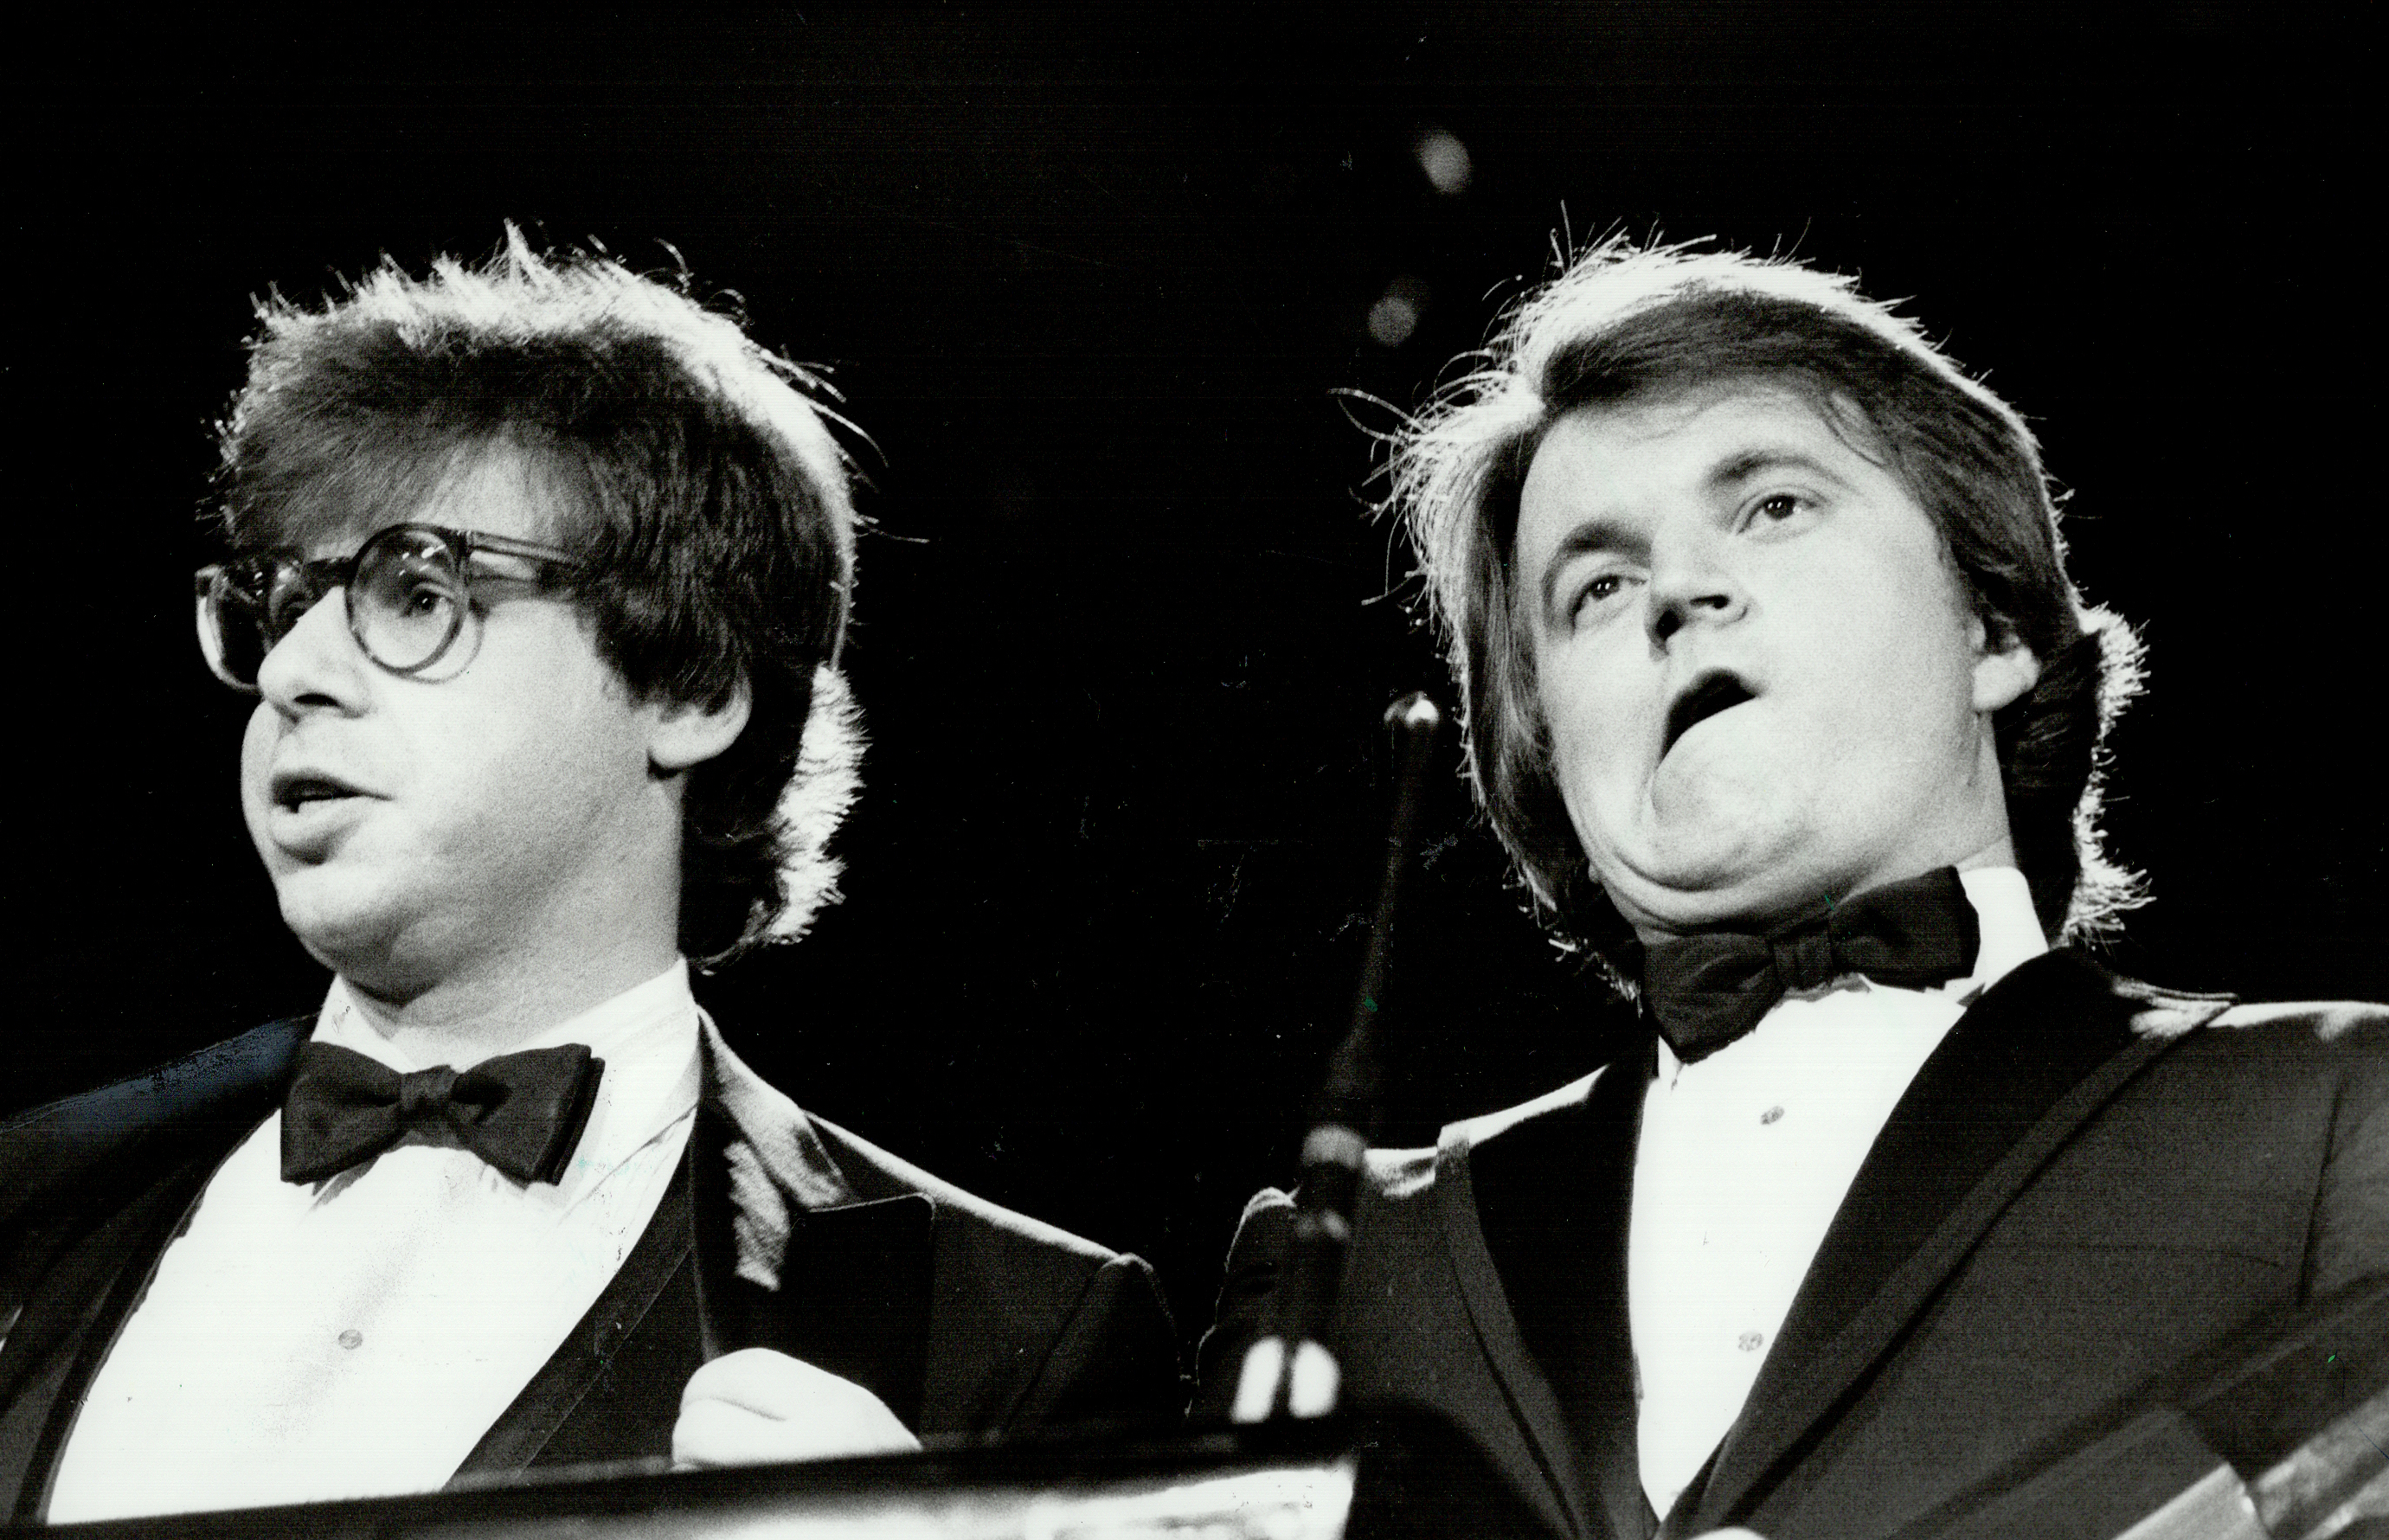 Rick Moranis and Dave Thomas accept their award for Best Humor Album on April 14, 1982 | Source: Getty Images